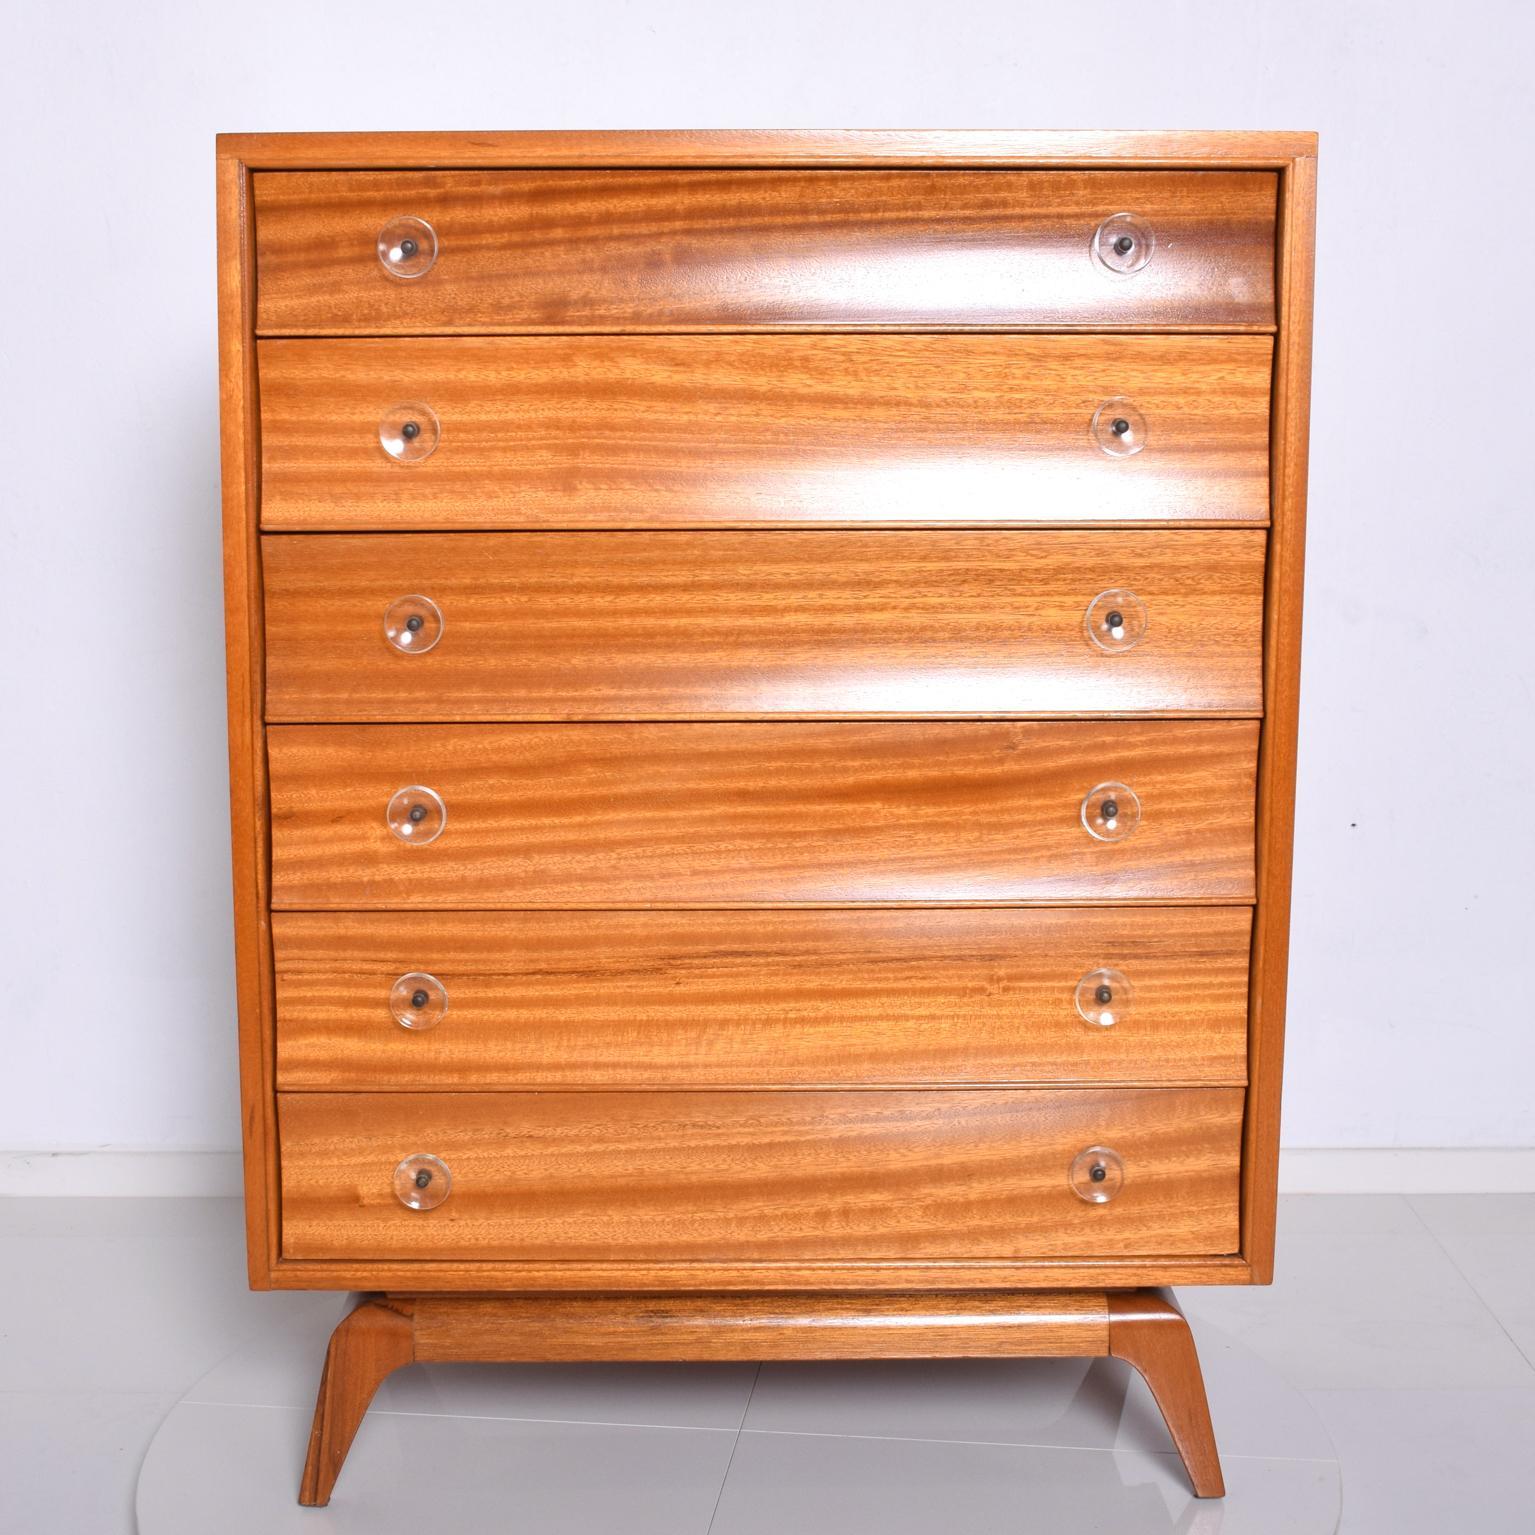 Gilbert Rohde Rare Art Deco Dresser in Sapele Wood with Lucite Pulls And Sculptural Flared Legs.
Sweet Simplicity & Elegance all in one. 
Dimensions are: 47